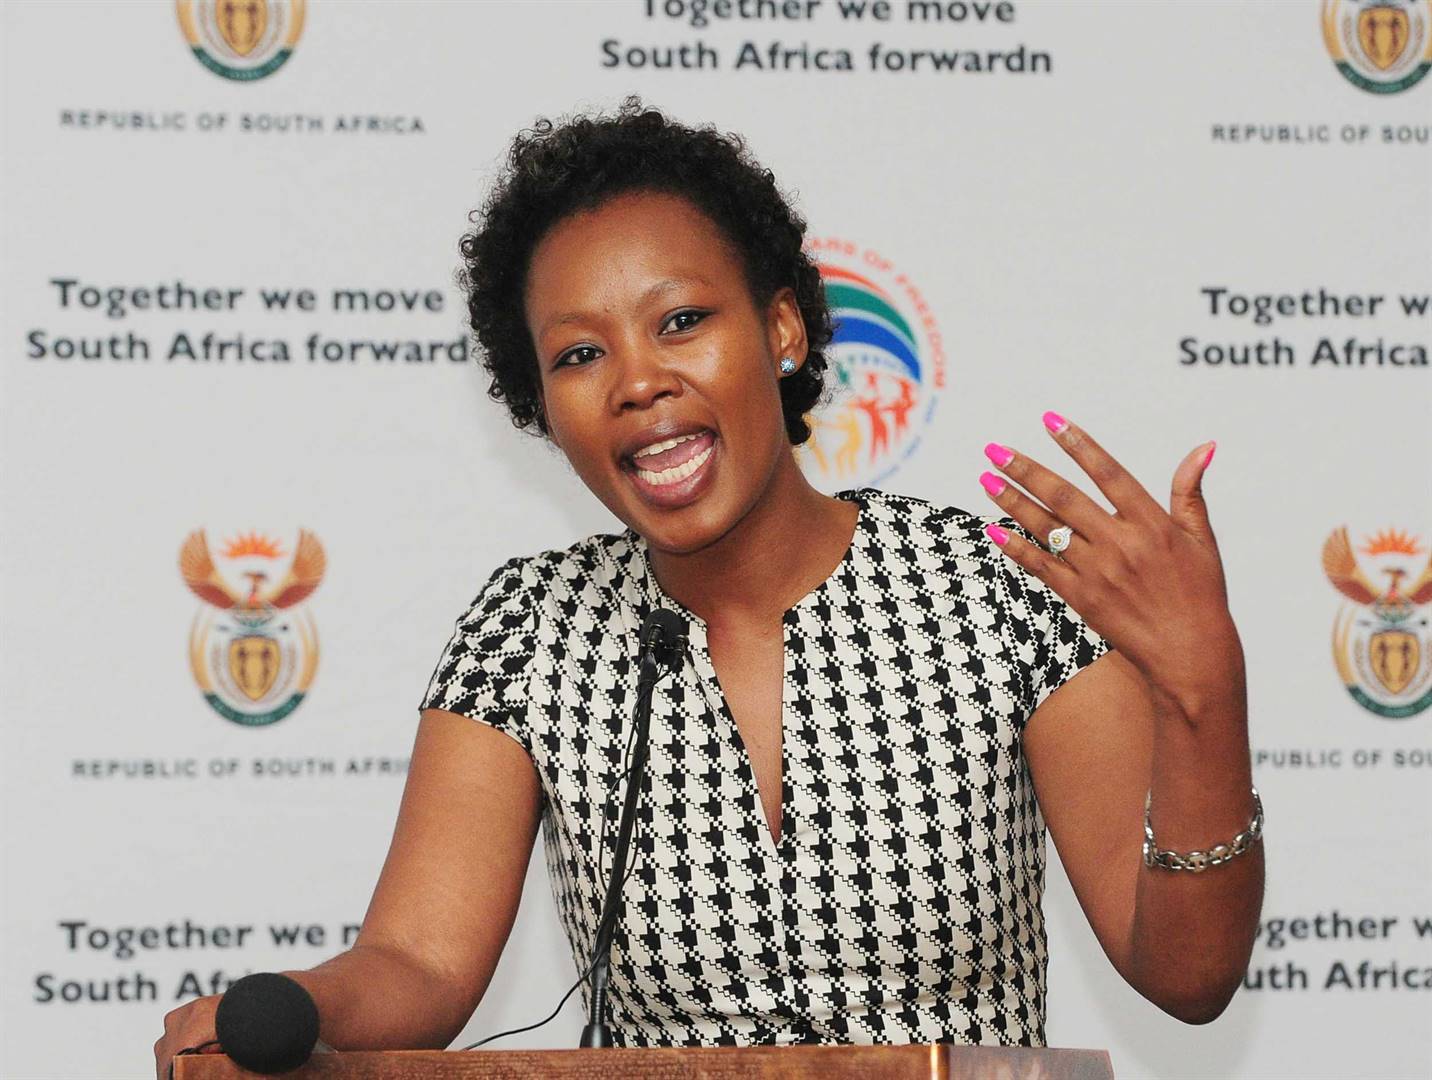 President Cyril Ramaphosa placed Minister of Communications and Digital Technologies Stella Ndabeni-Abrahams on special leave for two months – one month of which will be unpaid after it was alleged that she violated lockdown regulations.